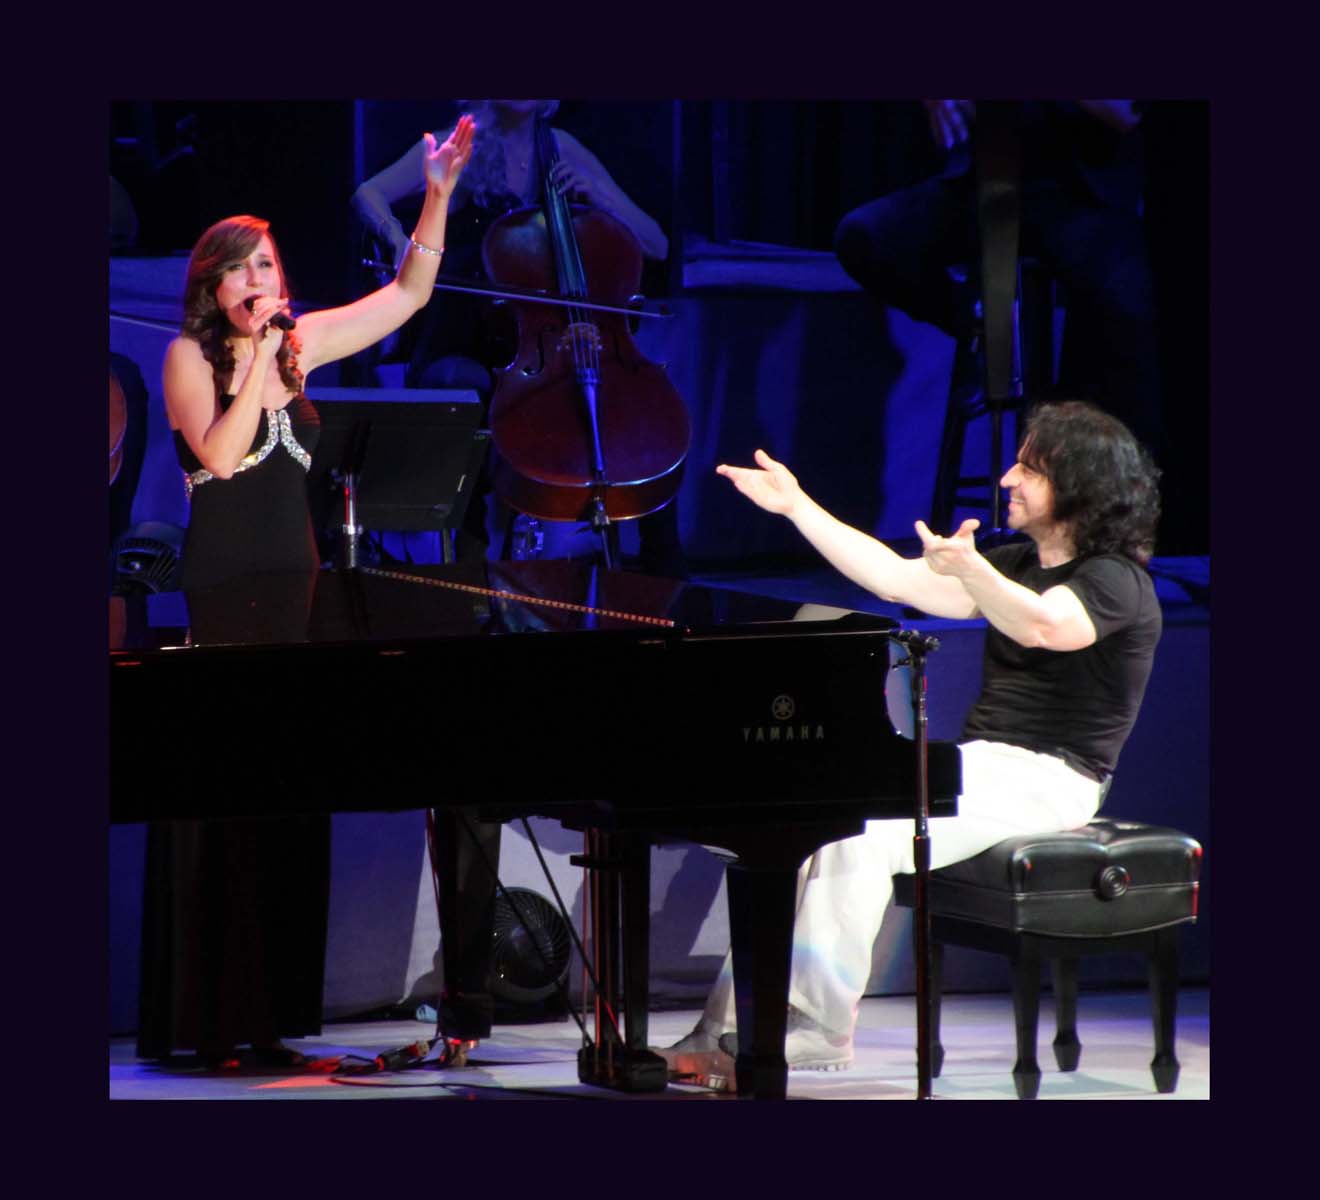 No dull moments in Yanni’s performance